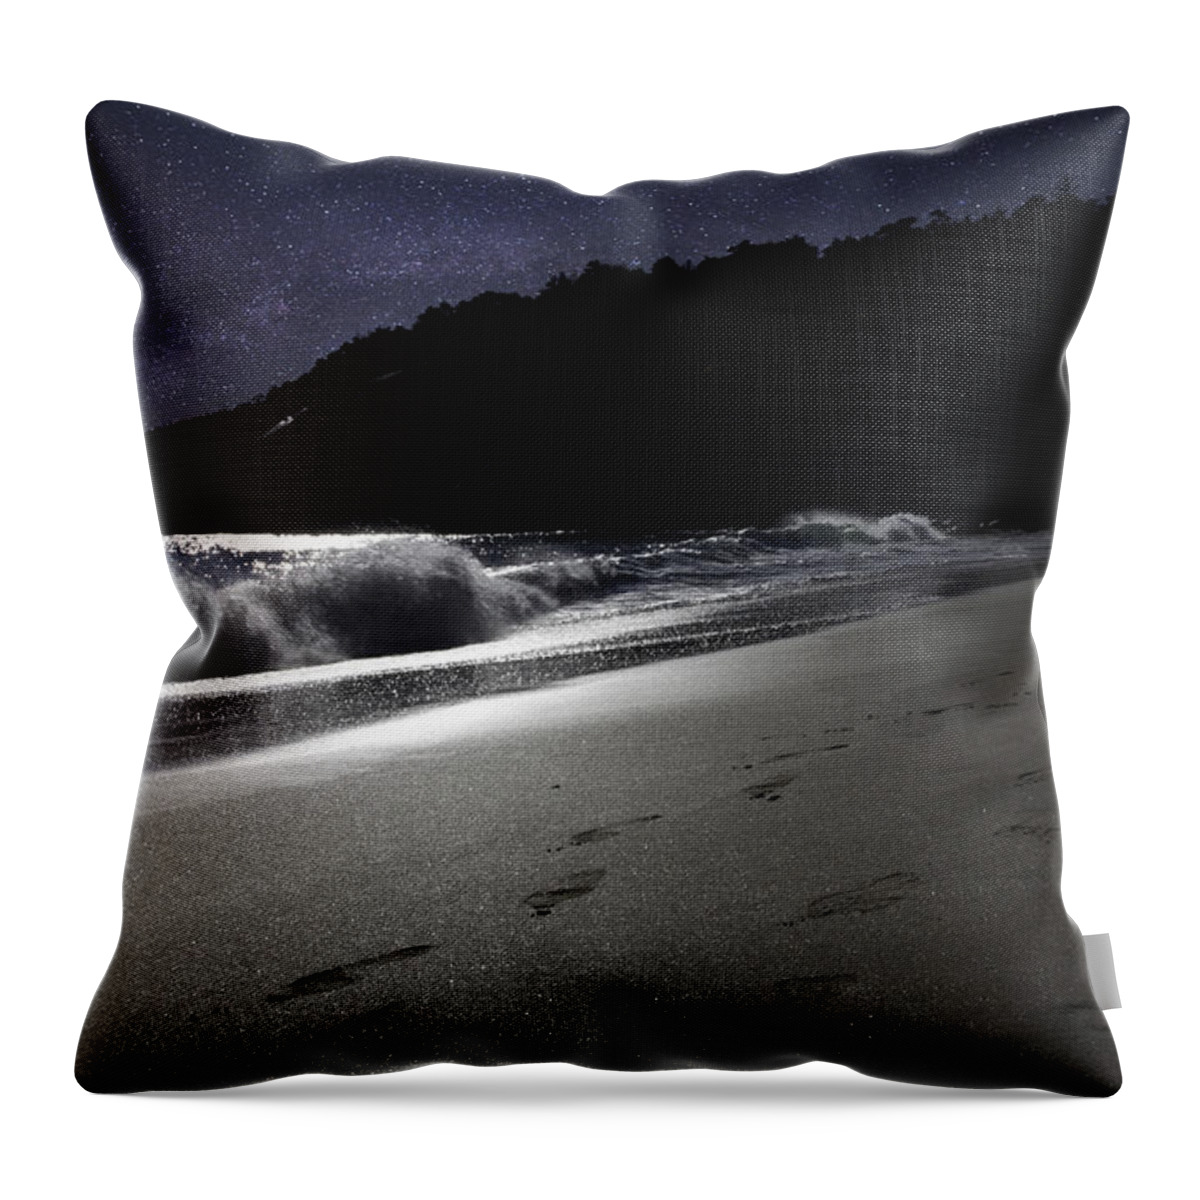 Beach Throw Pillow featuring the photograph Moonshine Beach by Brent L Ander